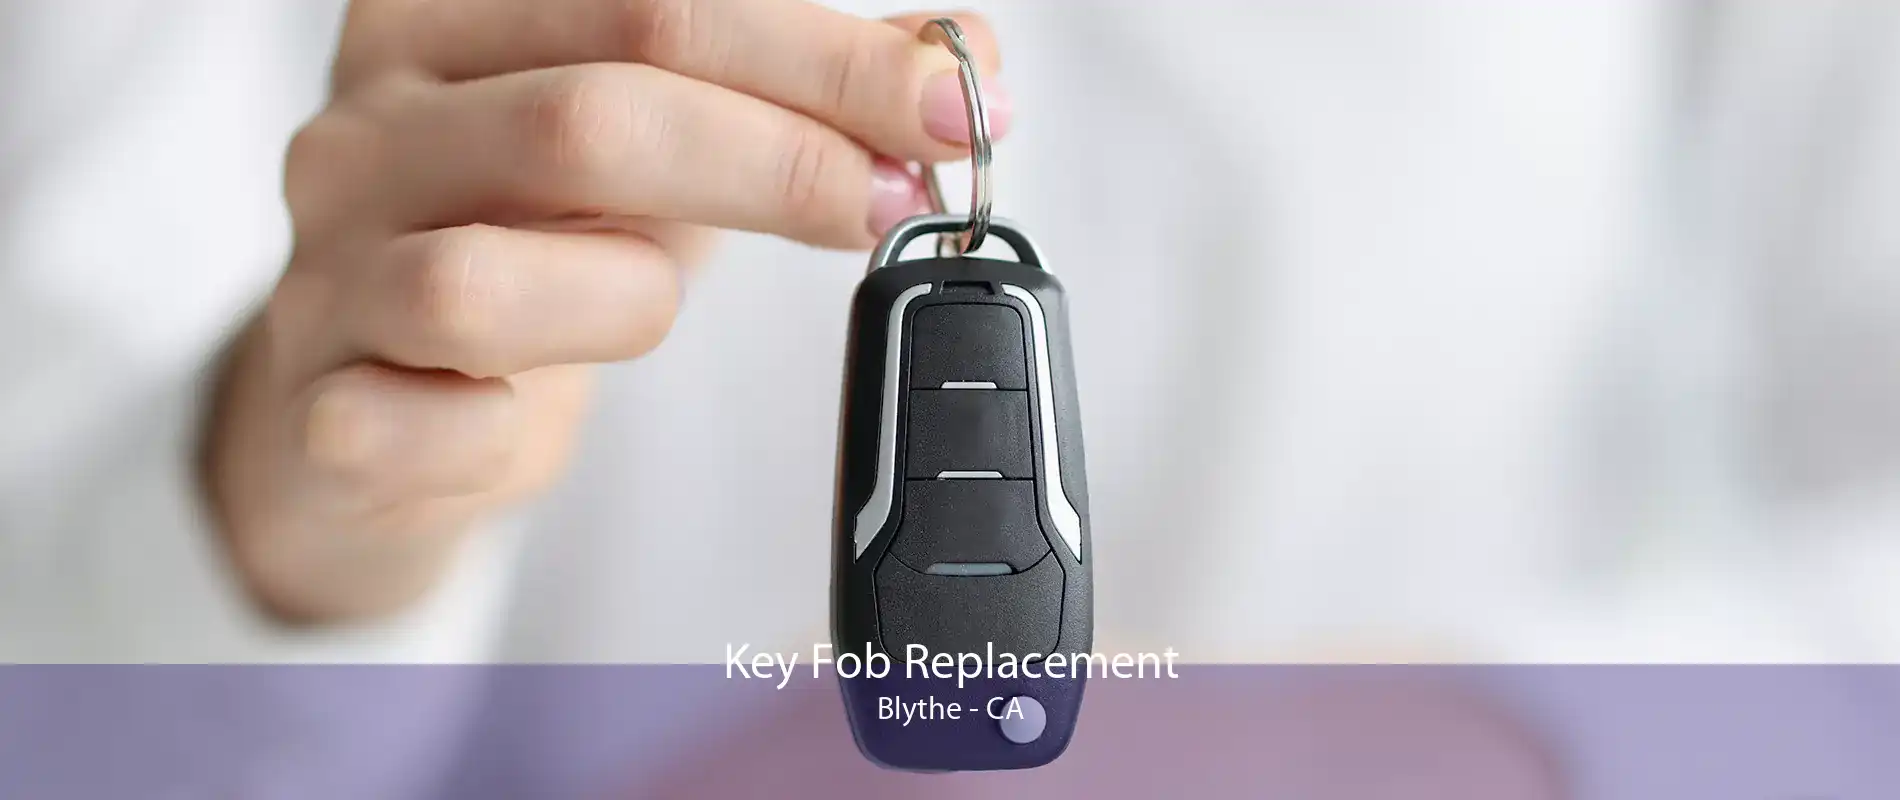 Key Fob Replacement Blythe - CA